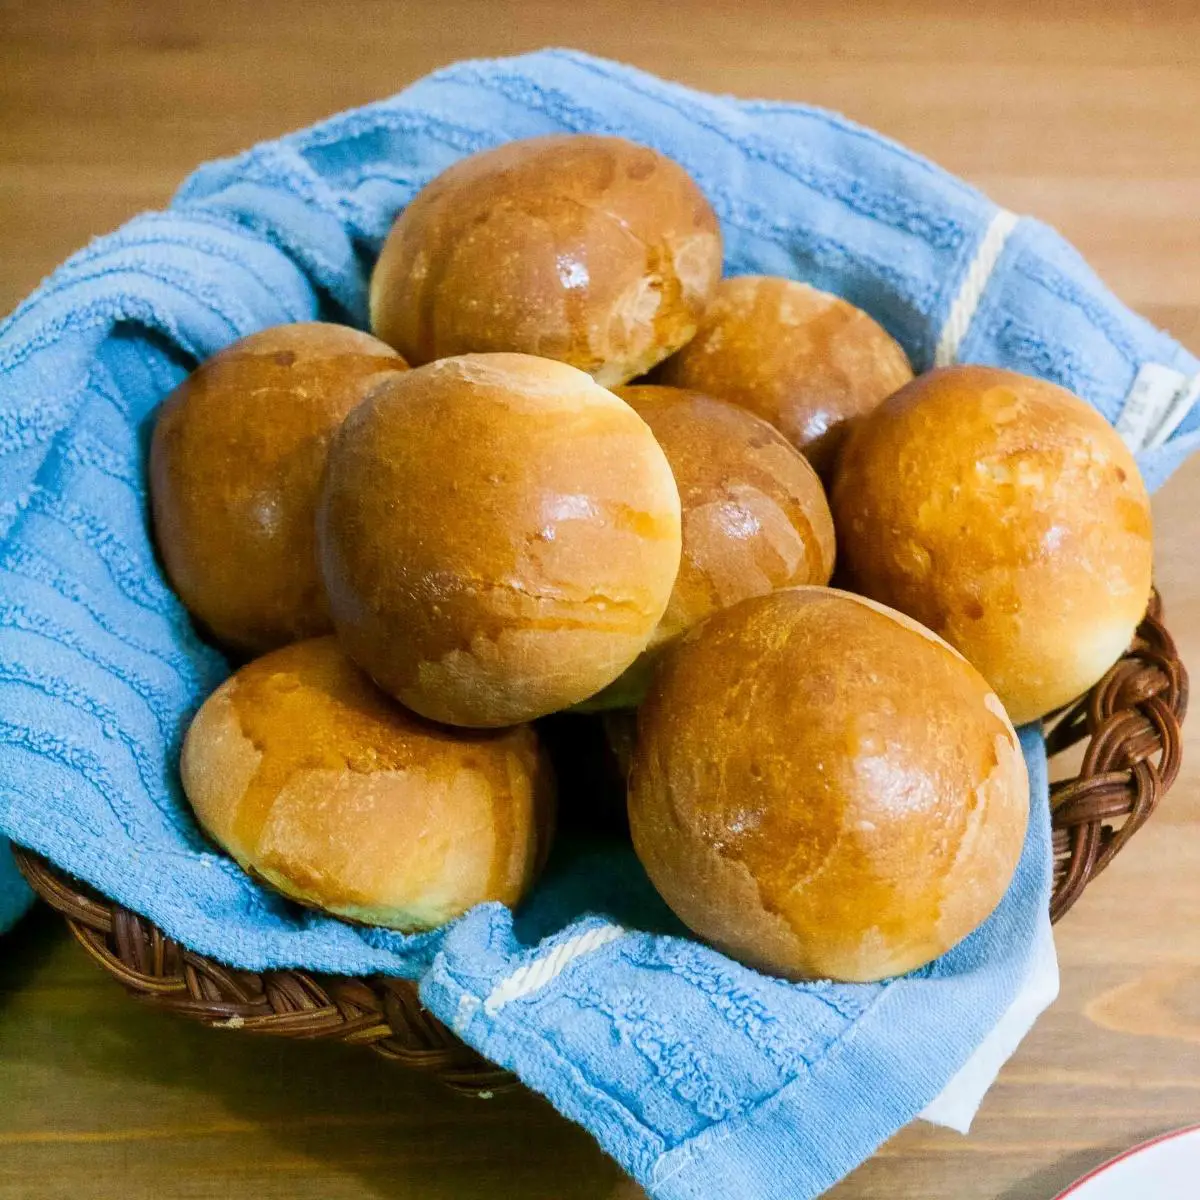 A basket with rolls.